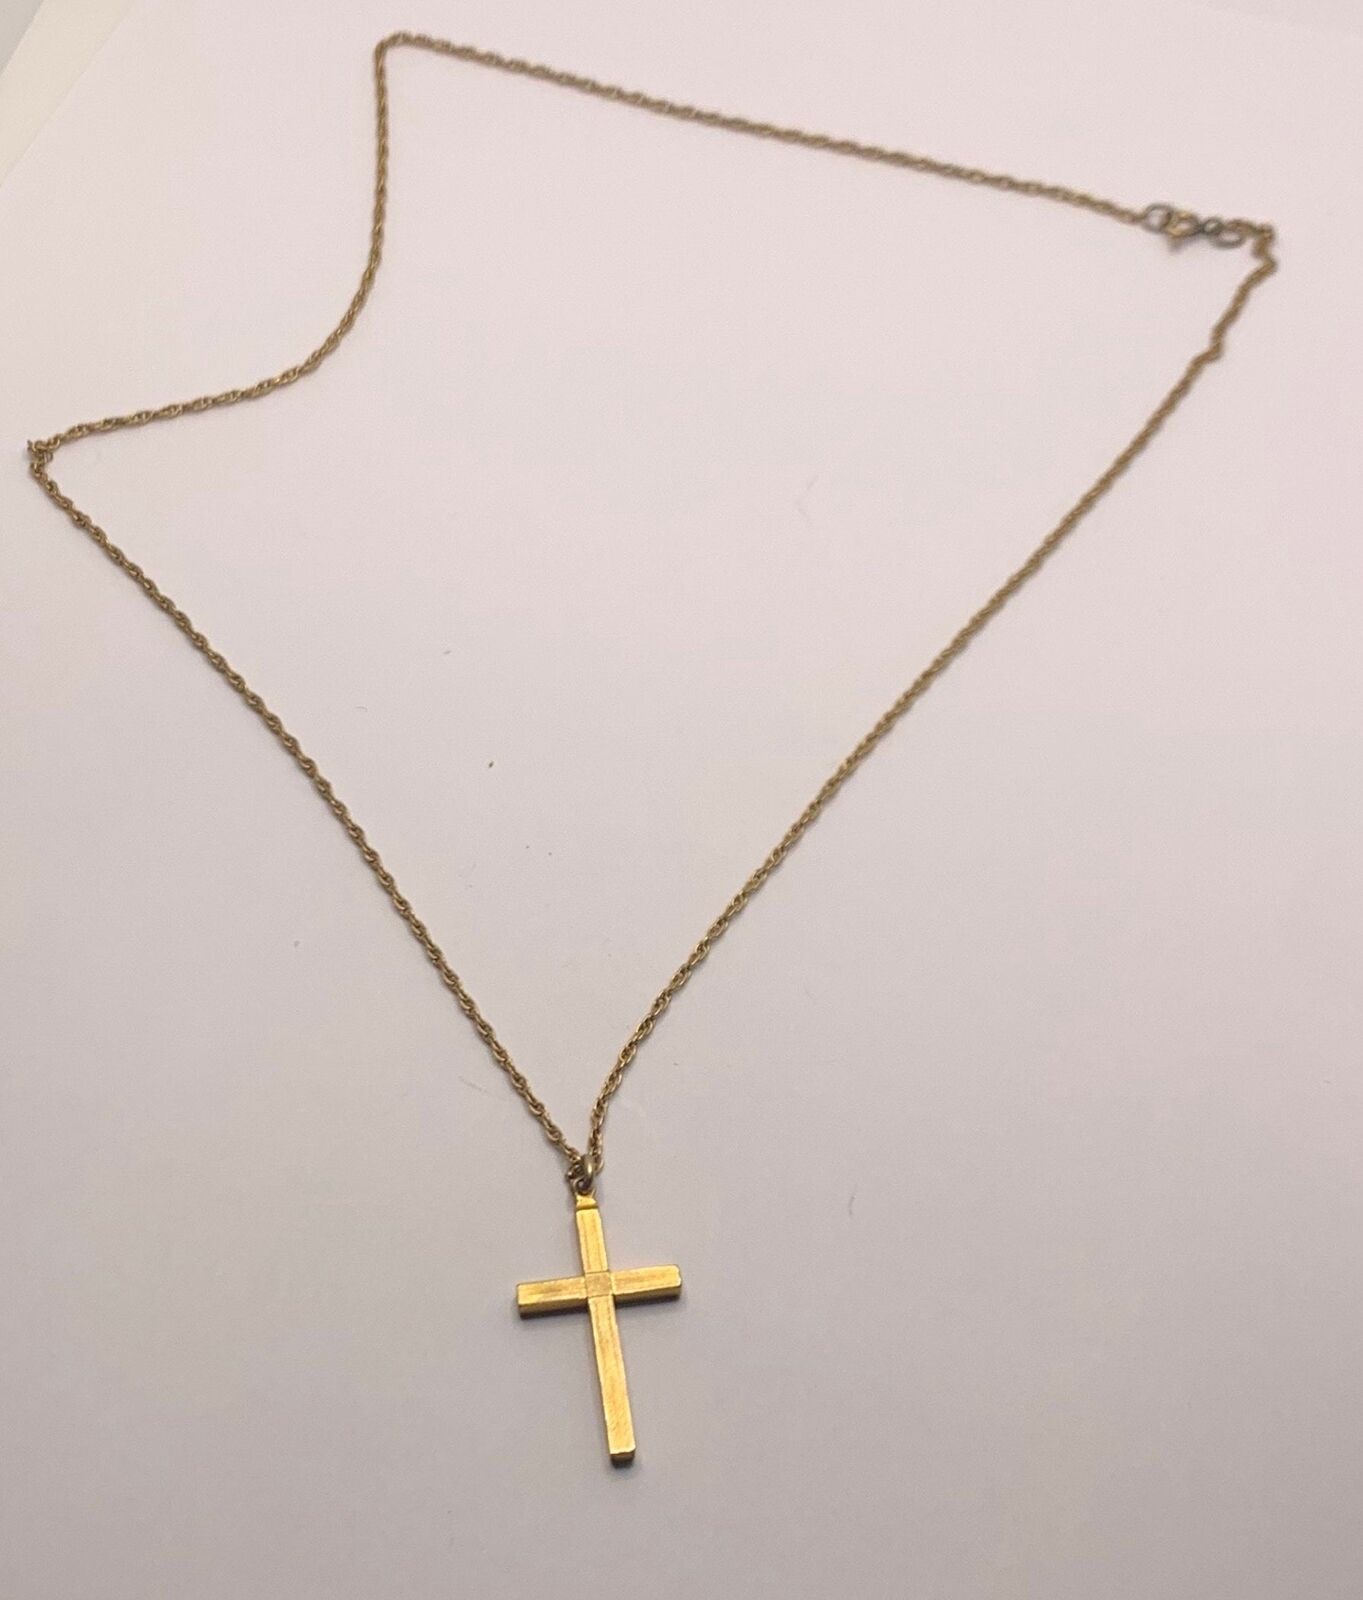 Vintage Gold Filled dainty simple cross pendant necklace